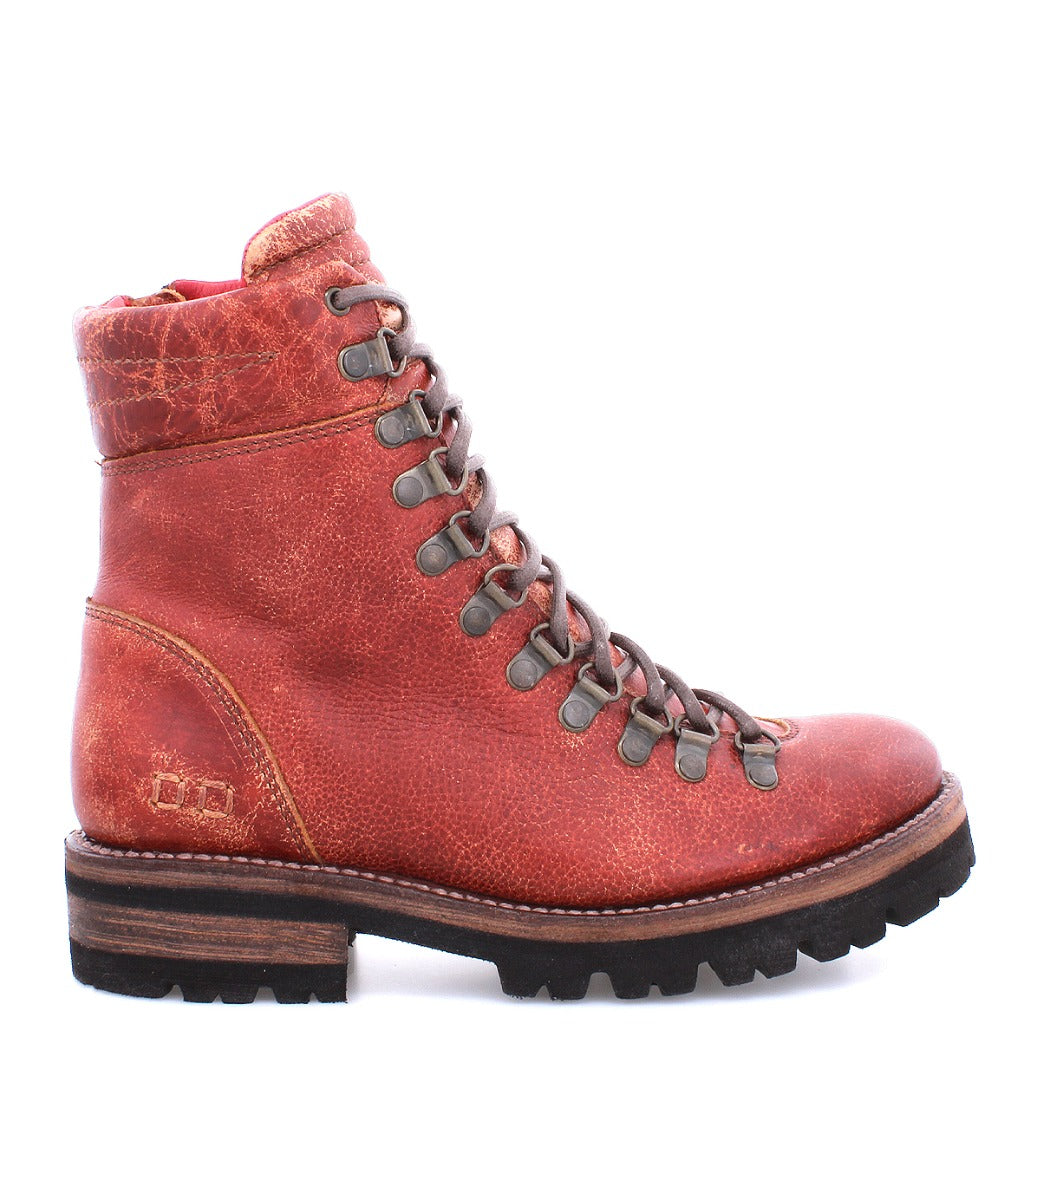 A Khya boot by Bed Stu, made of red leather with brown laces.